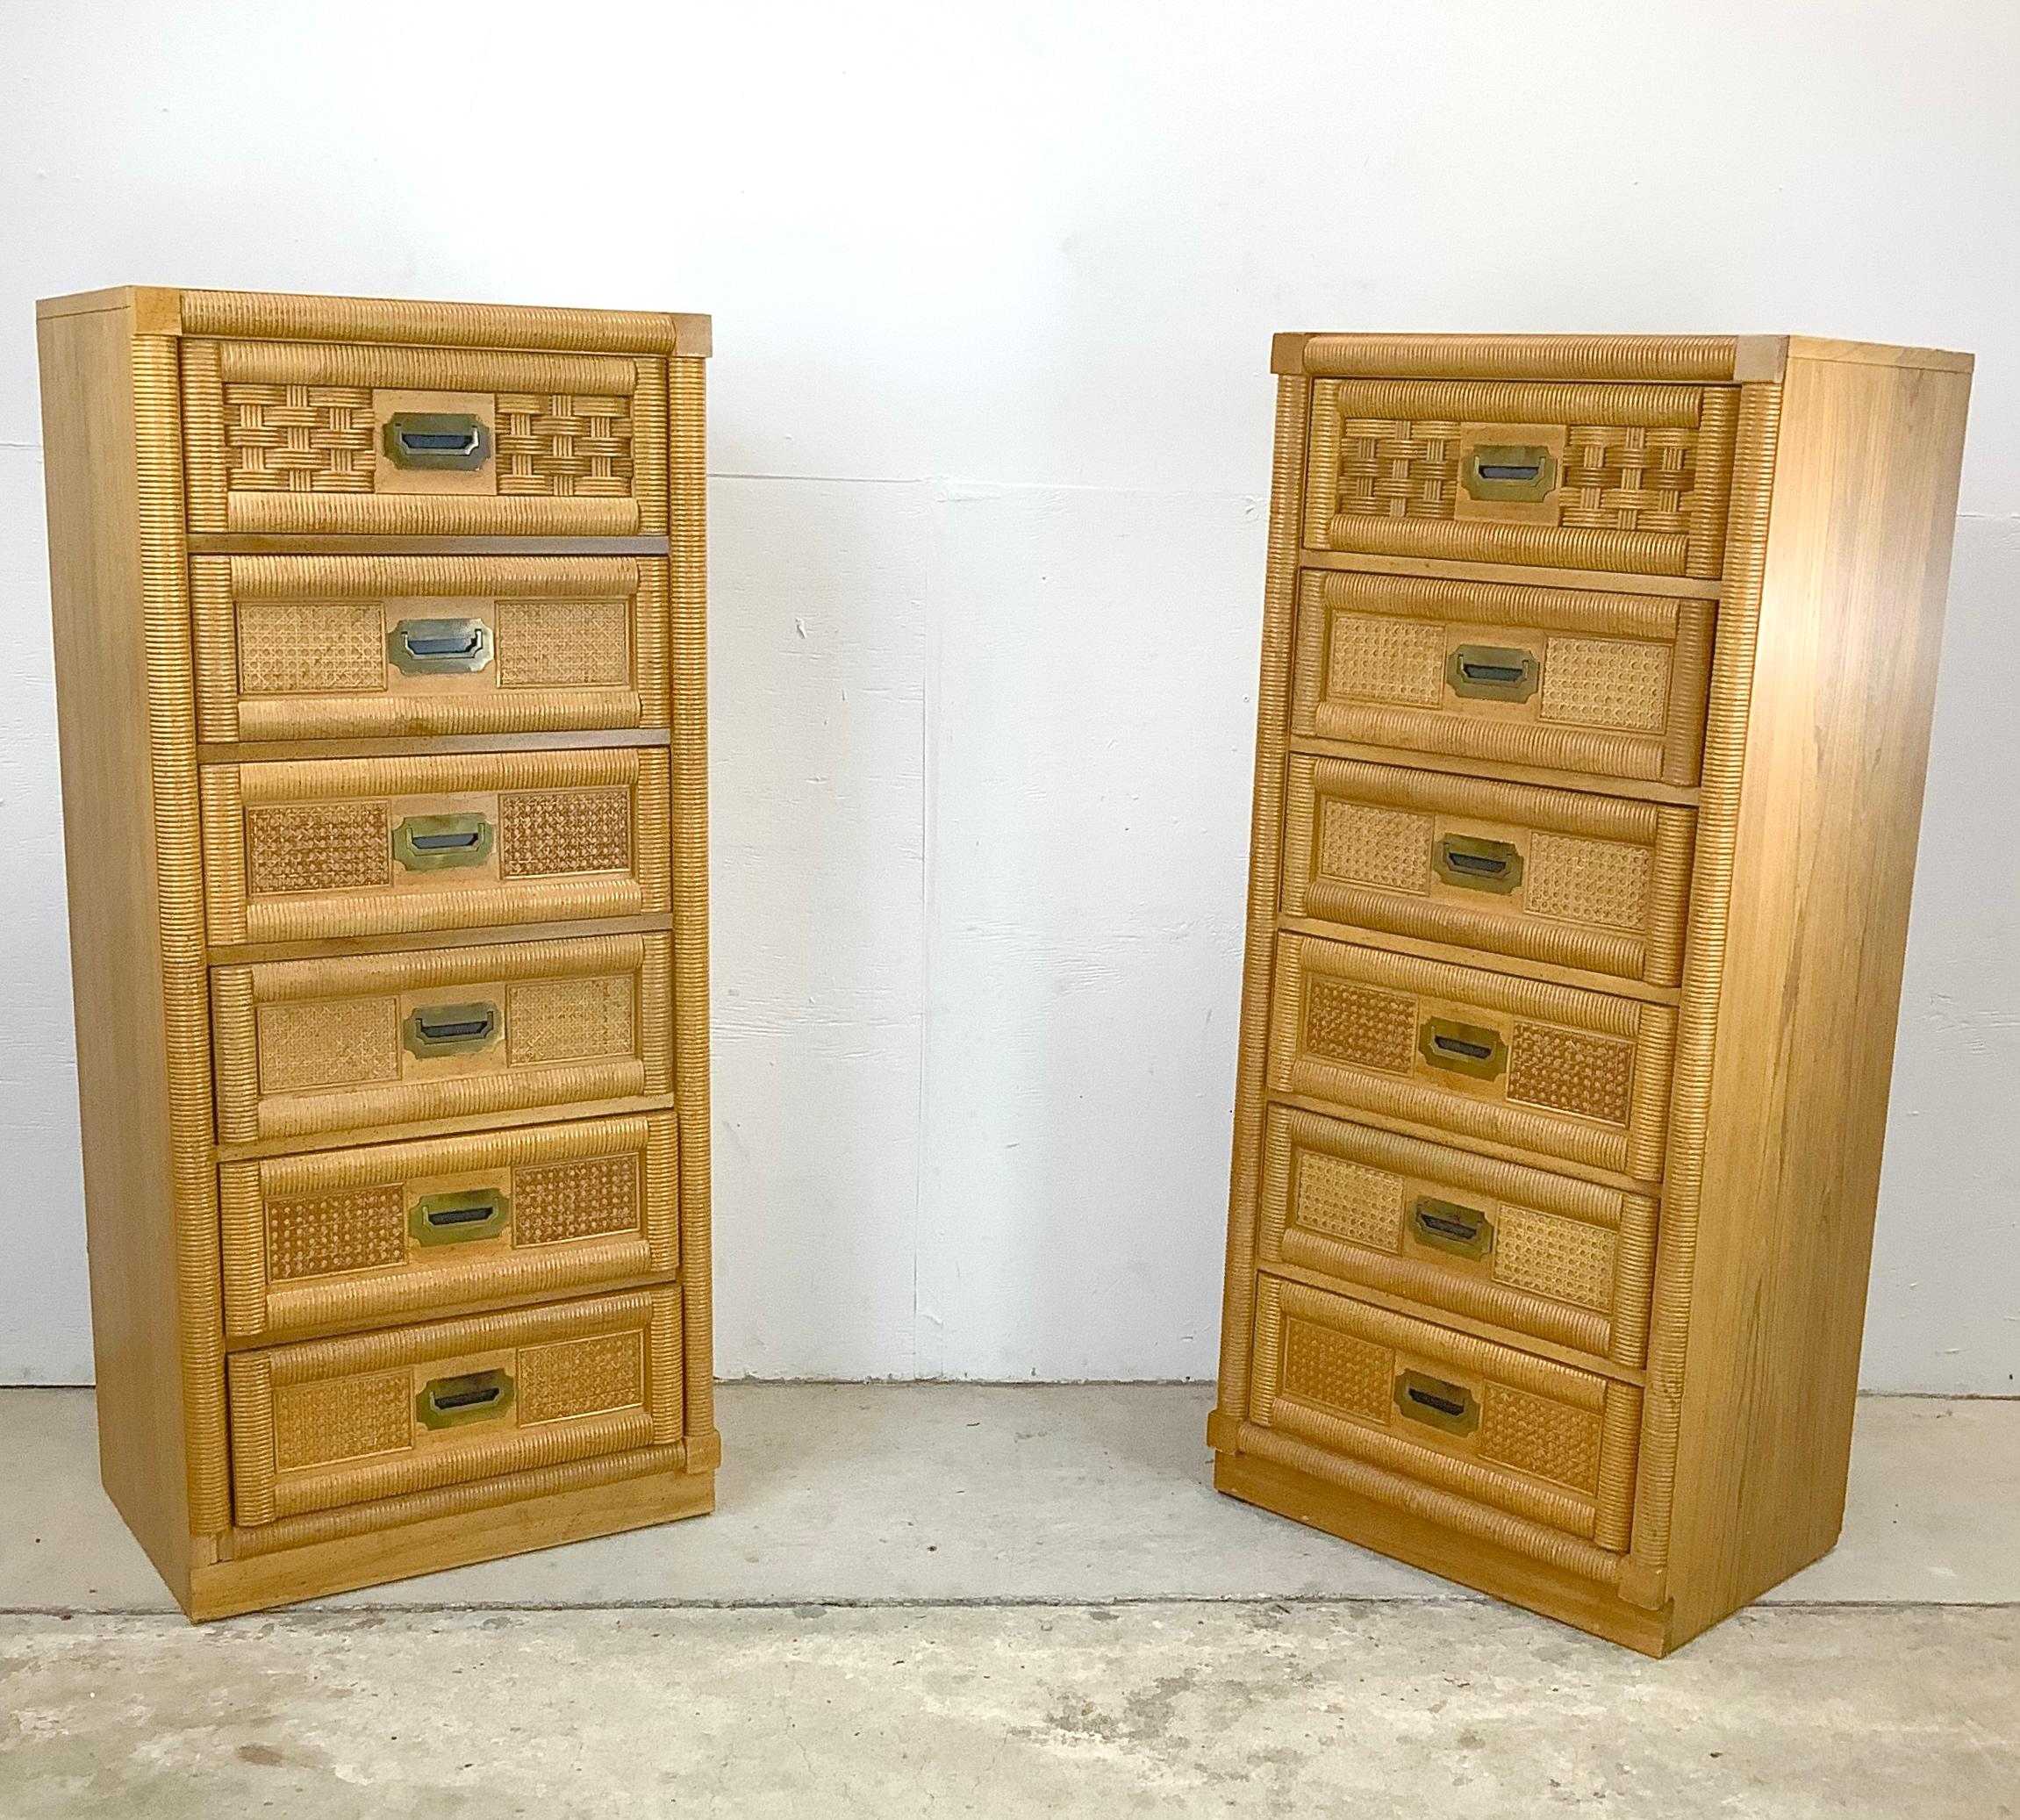 This elegant pair of Vintage Lingerie Chests crafted by Dixie Furniture, feature faux bamboo accents and eye catching campaign hardware that seamlessly combine style and functionality. These tall matching chests are designed to enhance your bedroom